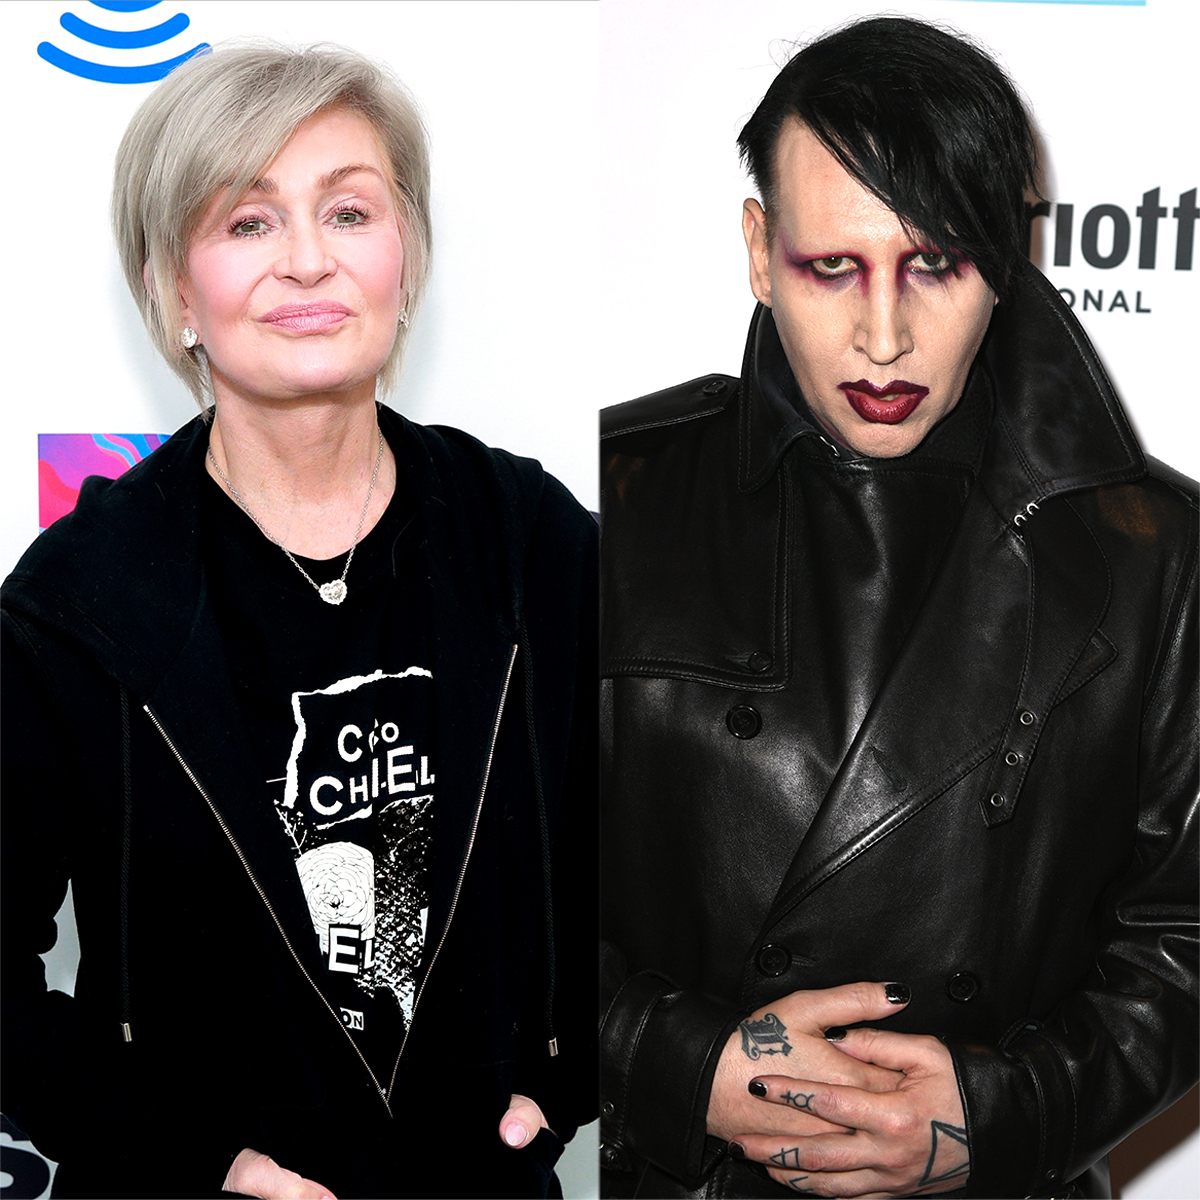 Sharon Osbourne talks about “Labor Relations” with Marilyn Manson